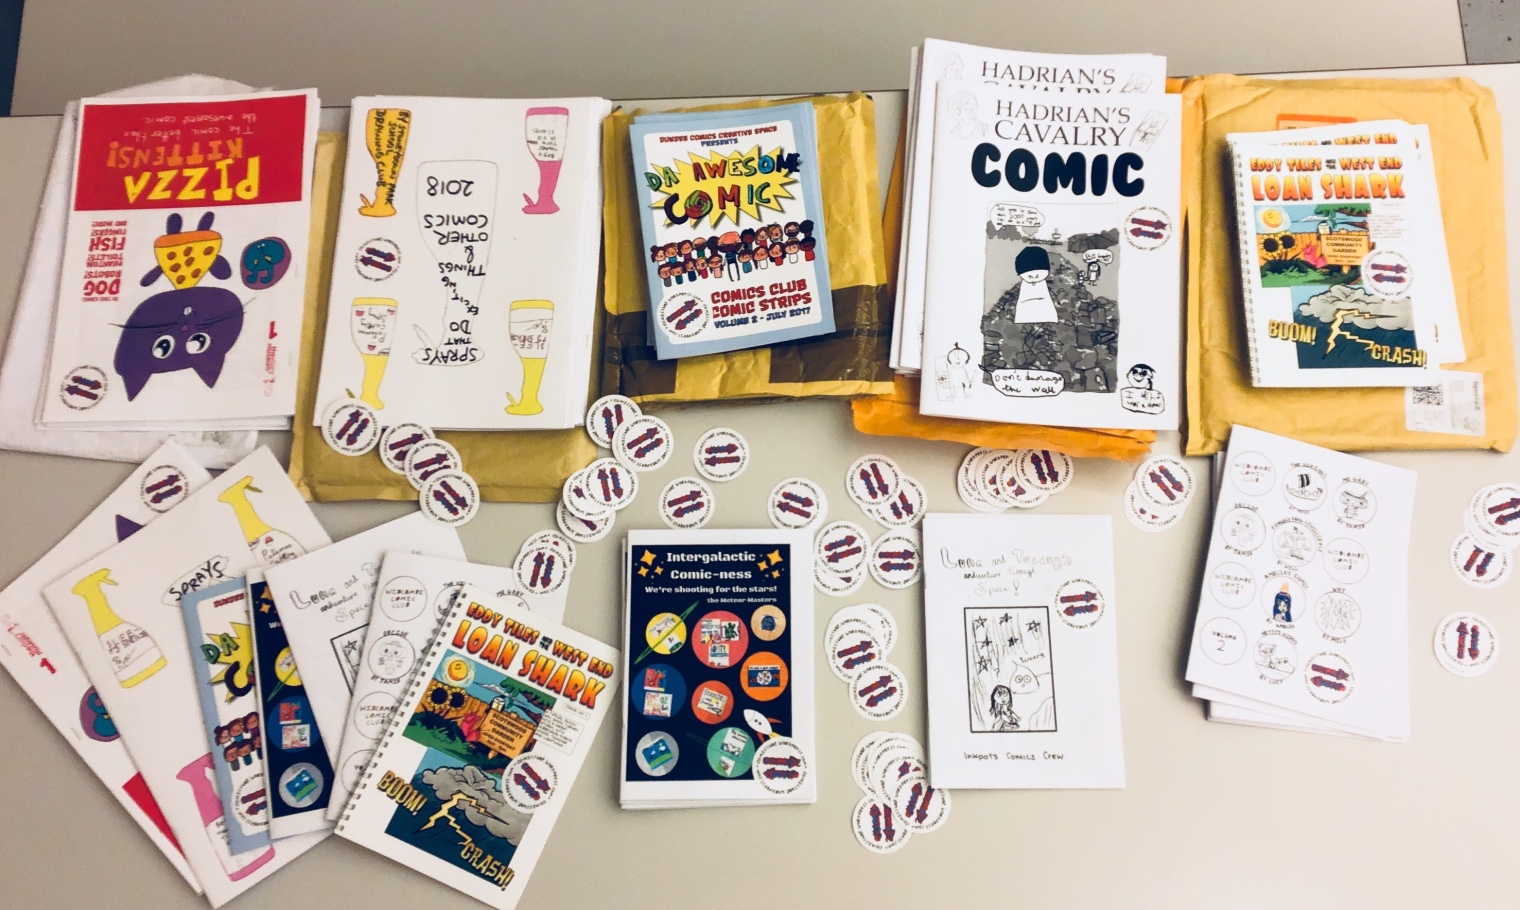 Children’s comics created through different projects were shared across the UK thanks to an ambitious Comic Swap organised by Applied Comics